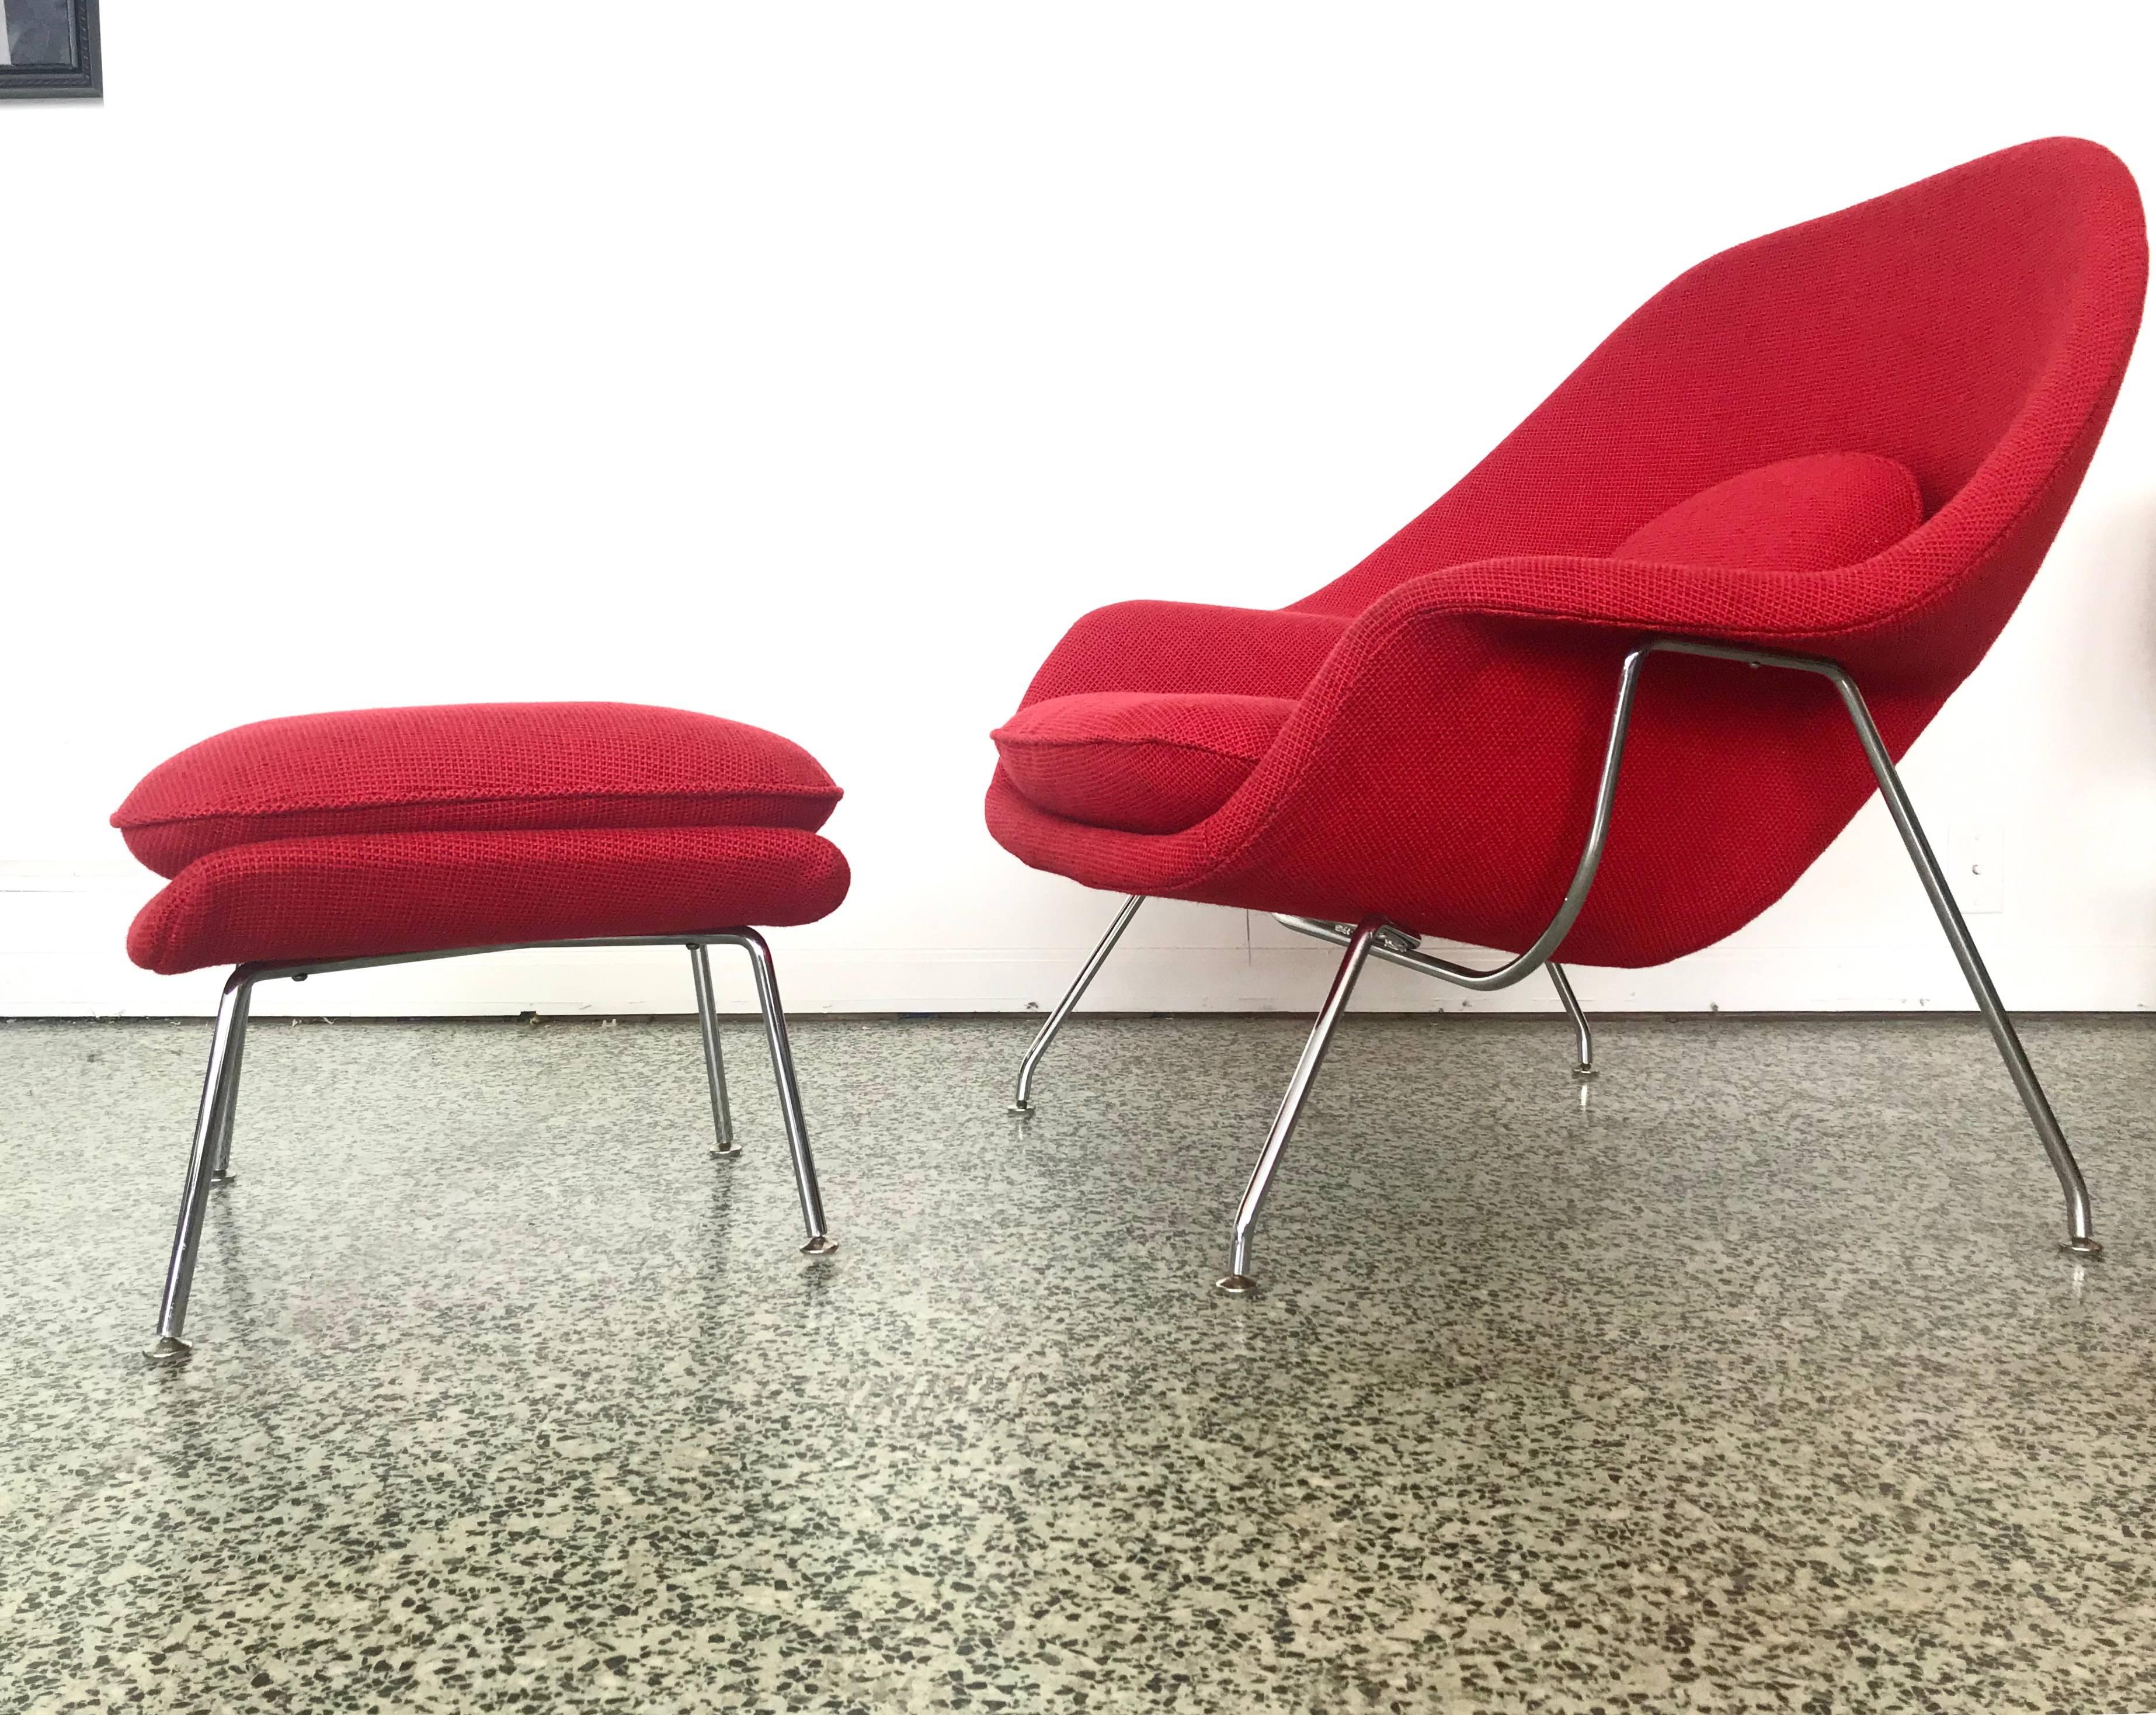 20th Century Early Eero Saarinen Womb Chair and Ottoman Produced by Knoll